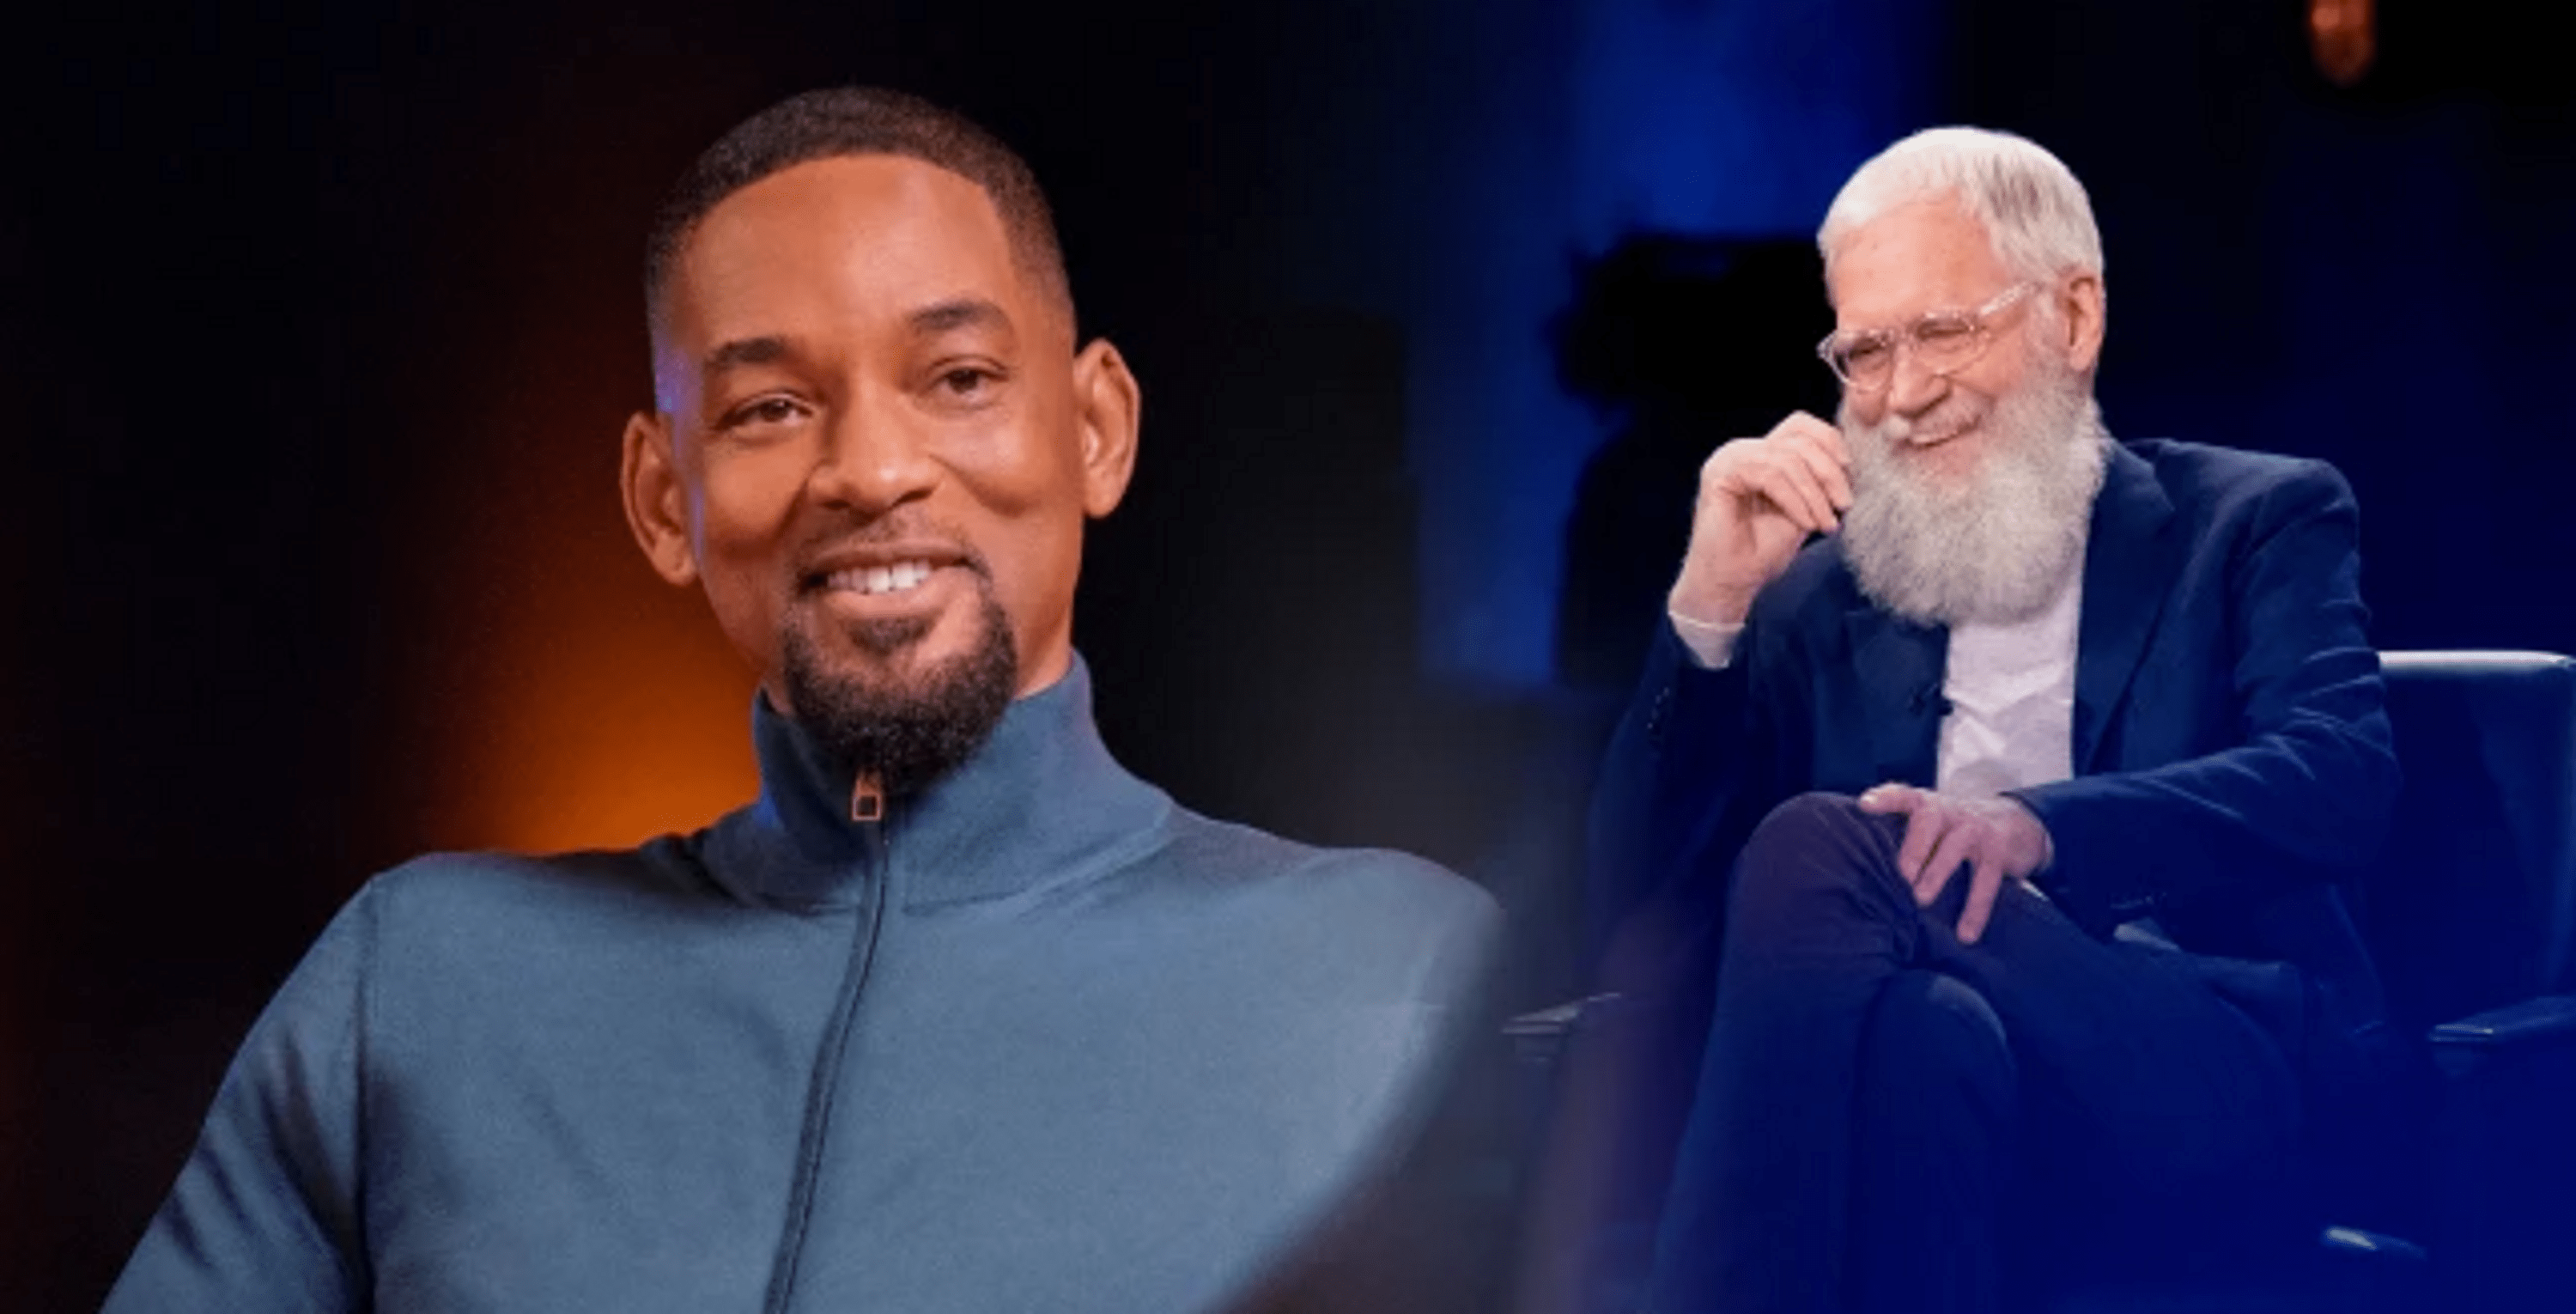 will-smith-recalls-the-hellish-experience-of-drinking-a-hallucinogenic-drink